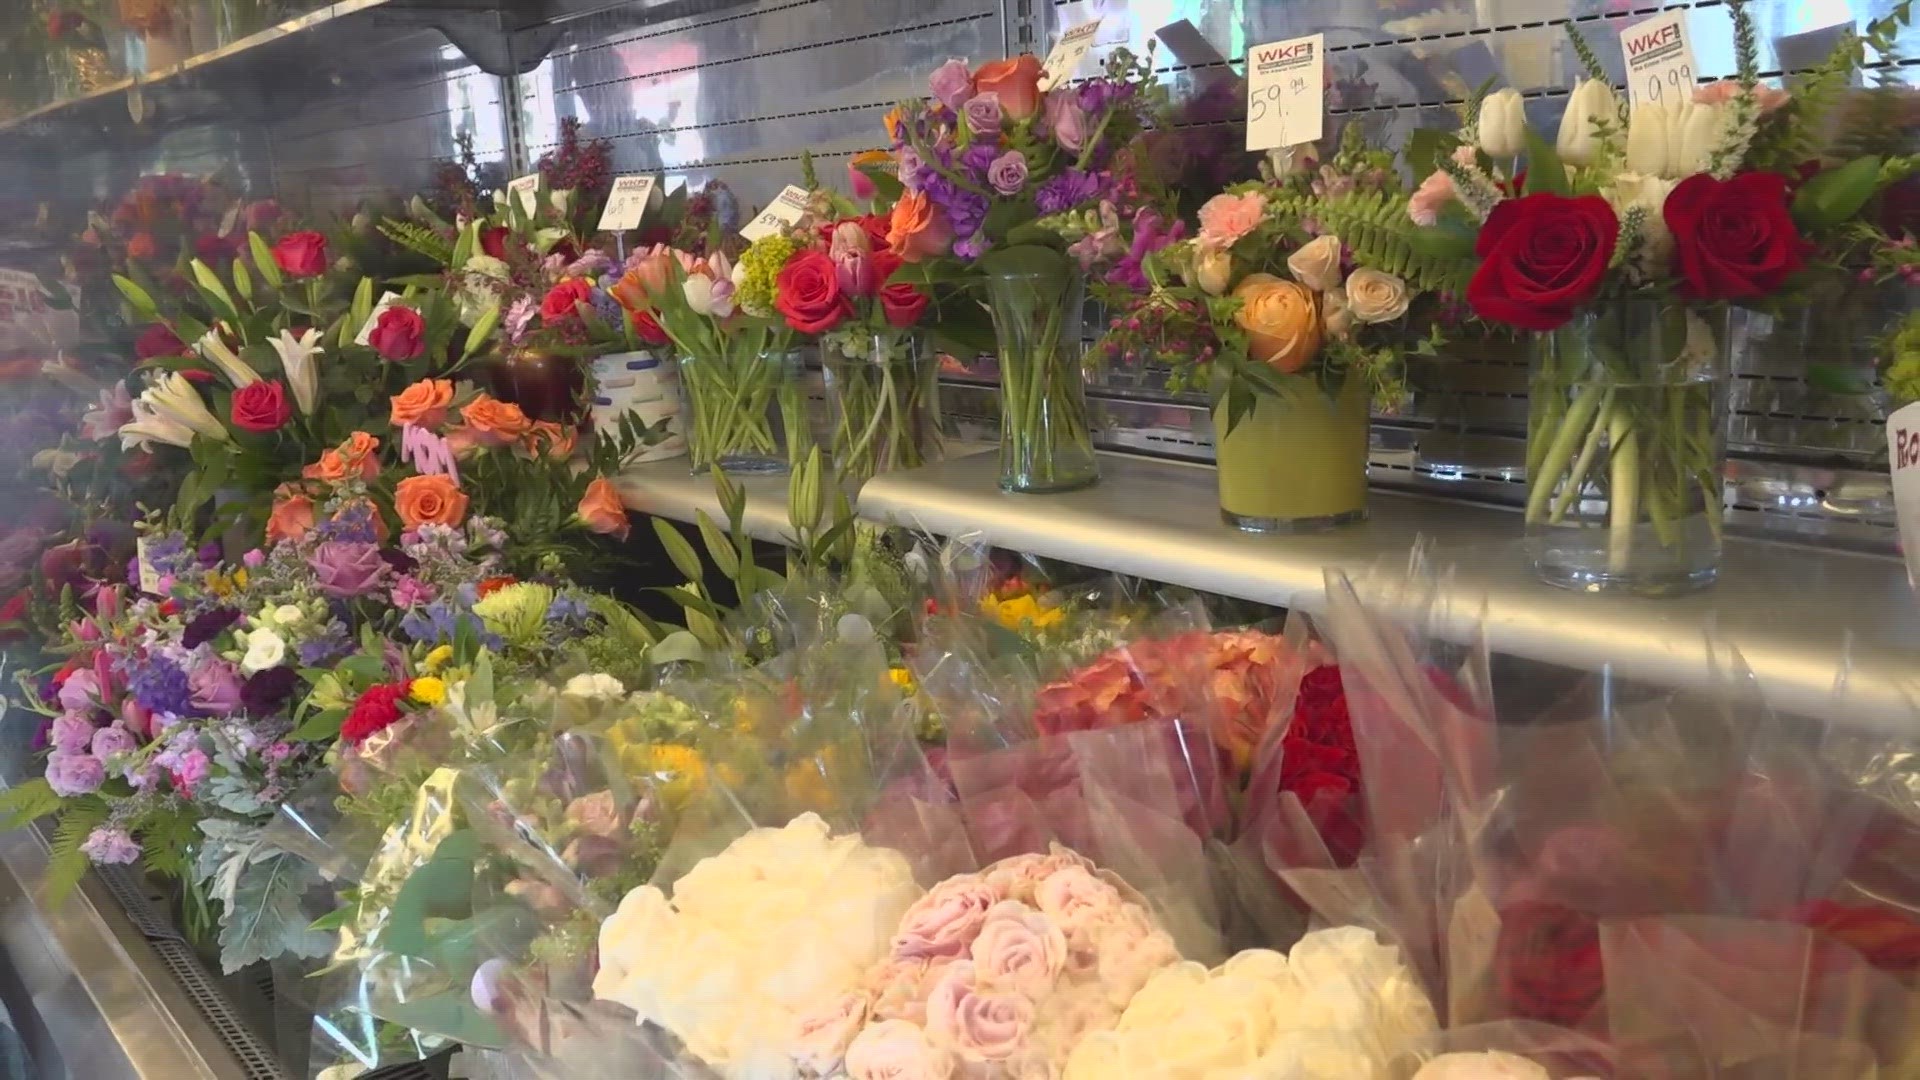 Mother's Day is just four days away, and flowers are definitely a go-to gift for mom. But you may think finding the perfect bouquet would be a challenge.